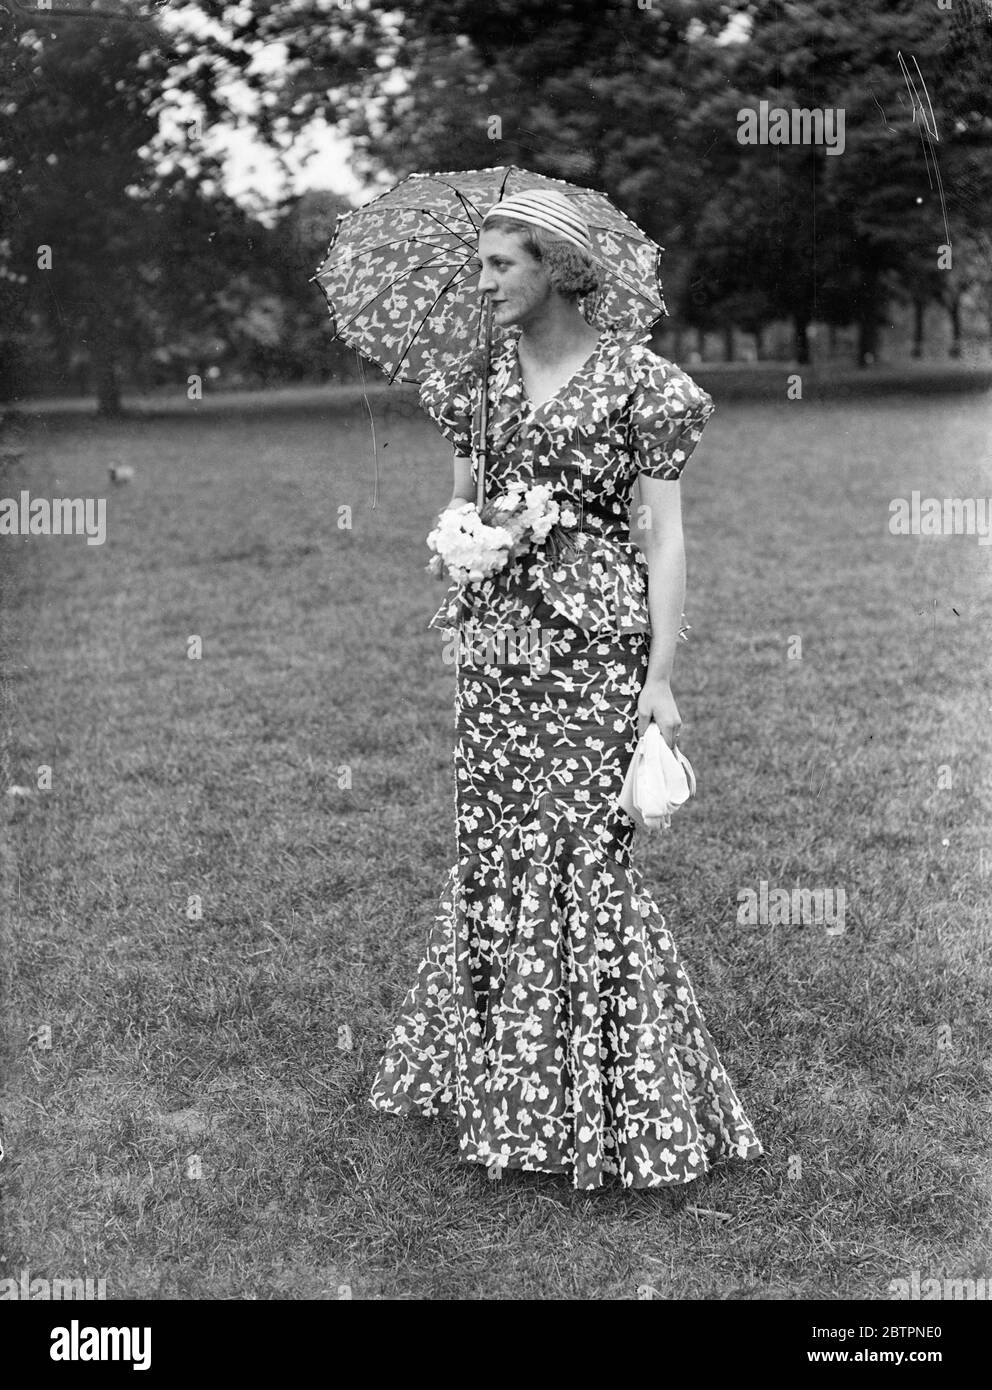 Prepared for a sunny Ascot. A flowered fashion of navy blue wall, embroidered organdia, with parasol to match, which will be seen on the course when the Royal ascot opens next week Dress is trimmed with white violets. 11 June 1937 Stock Photo